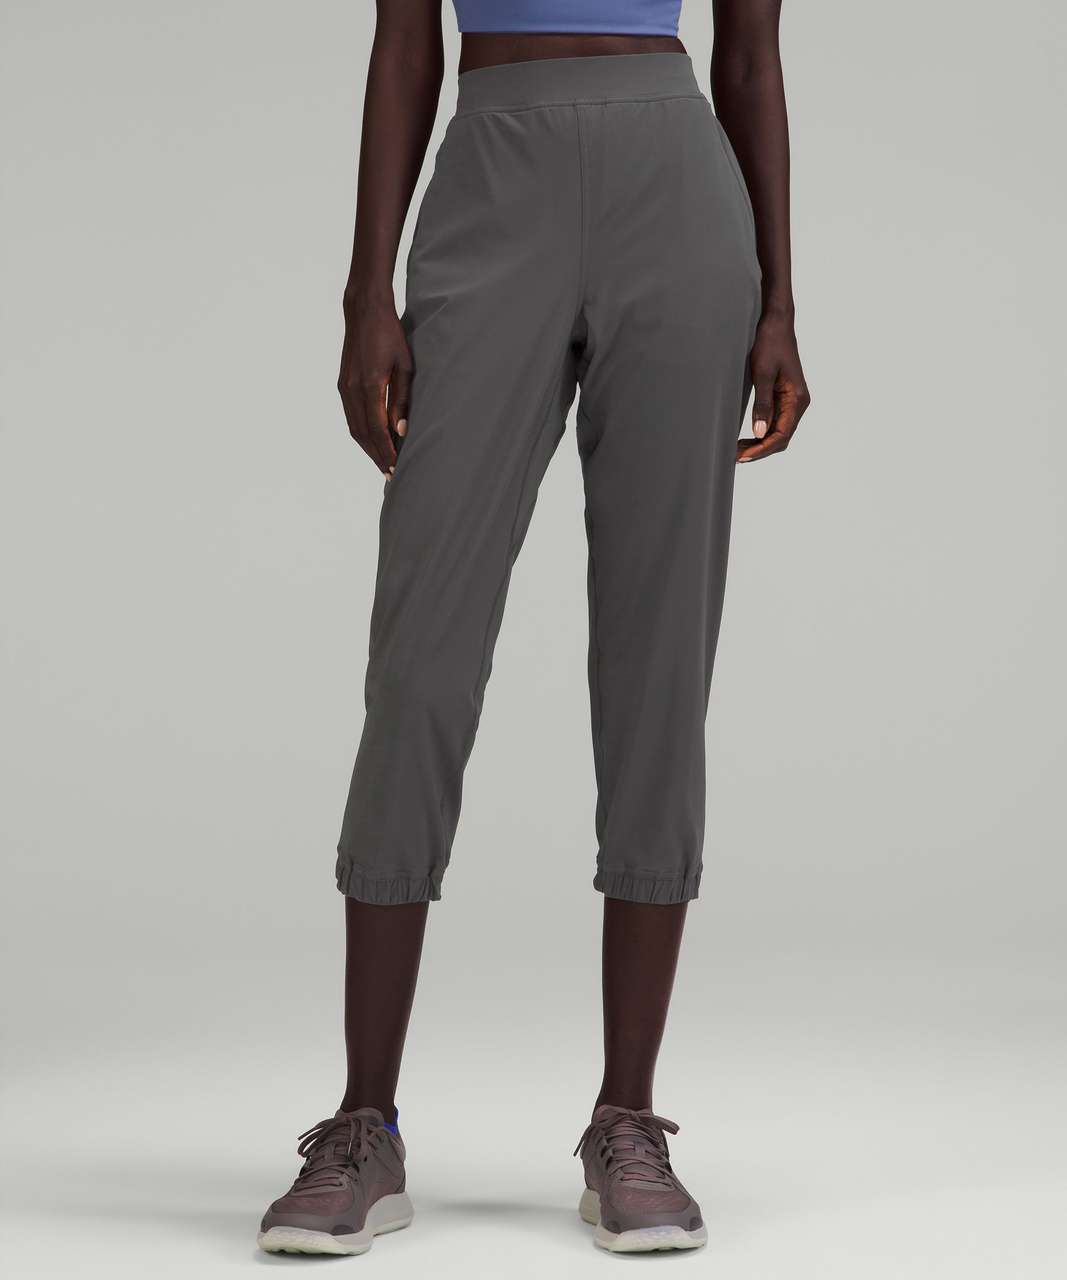 Lululemon Adapted State High-Rise Cropped Jogger 23" - Graphite Grey